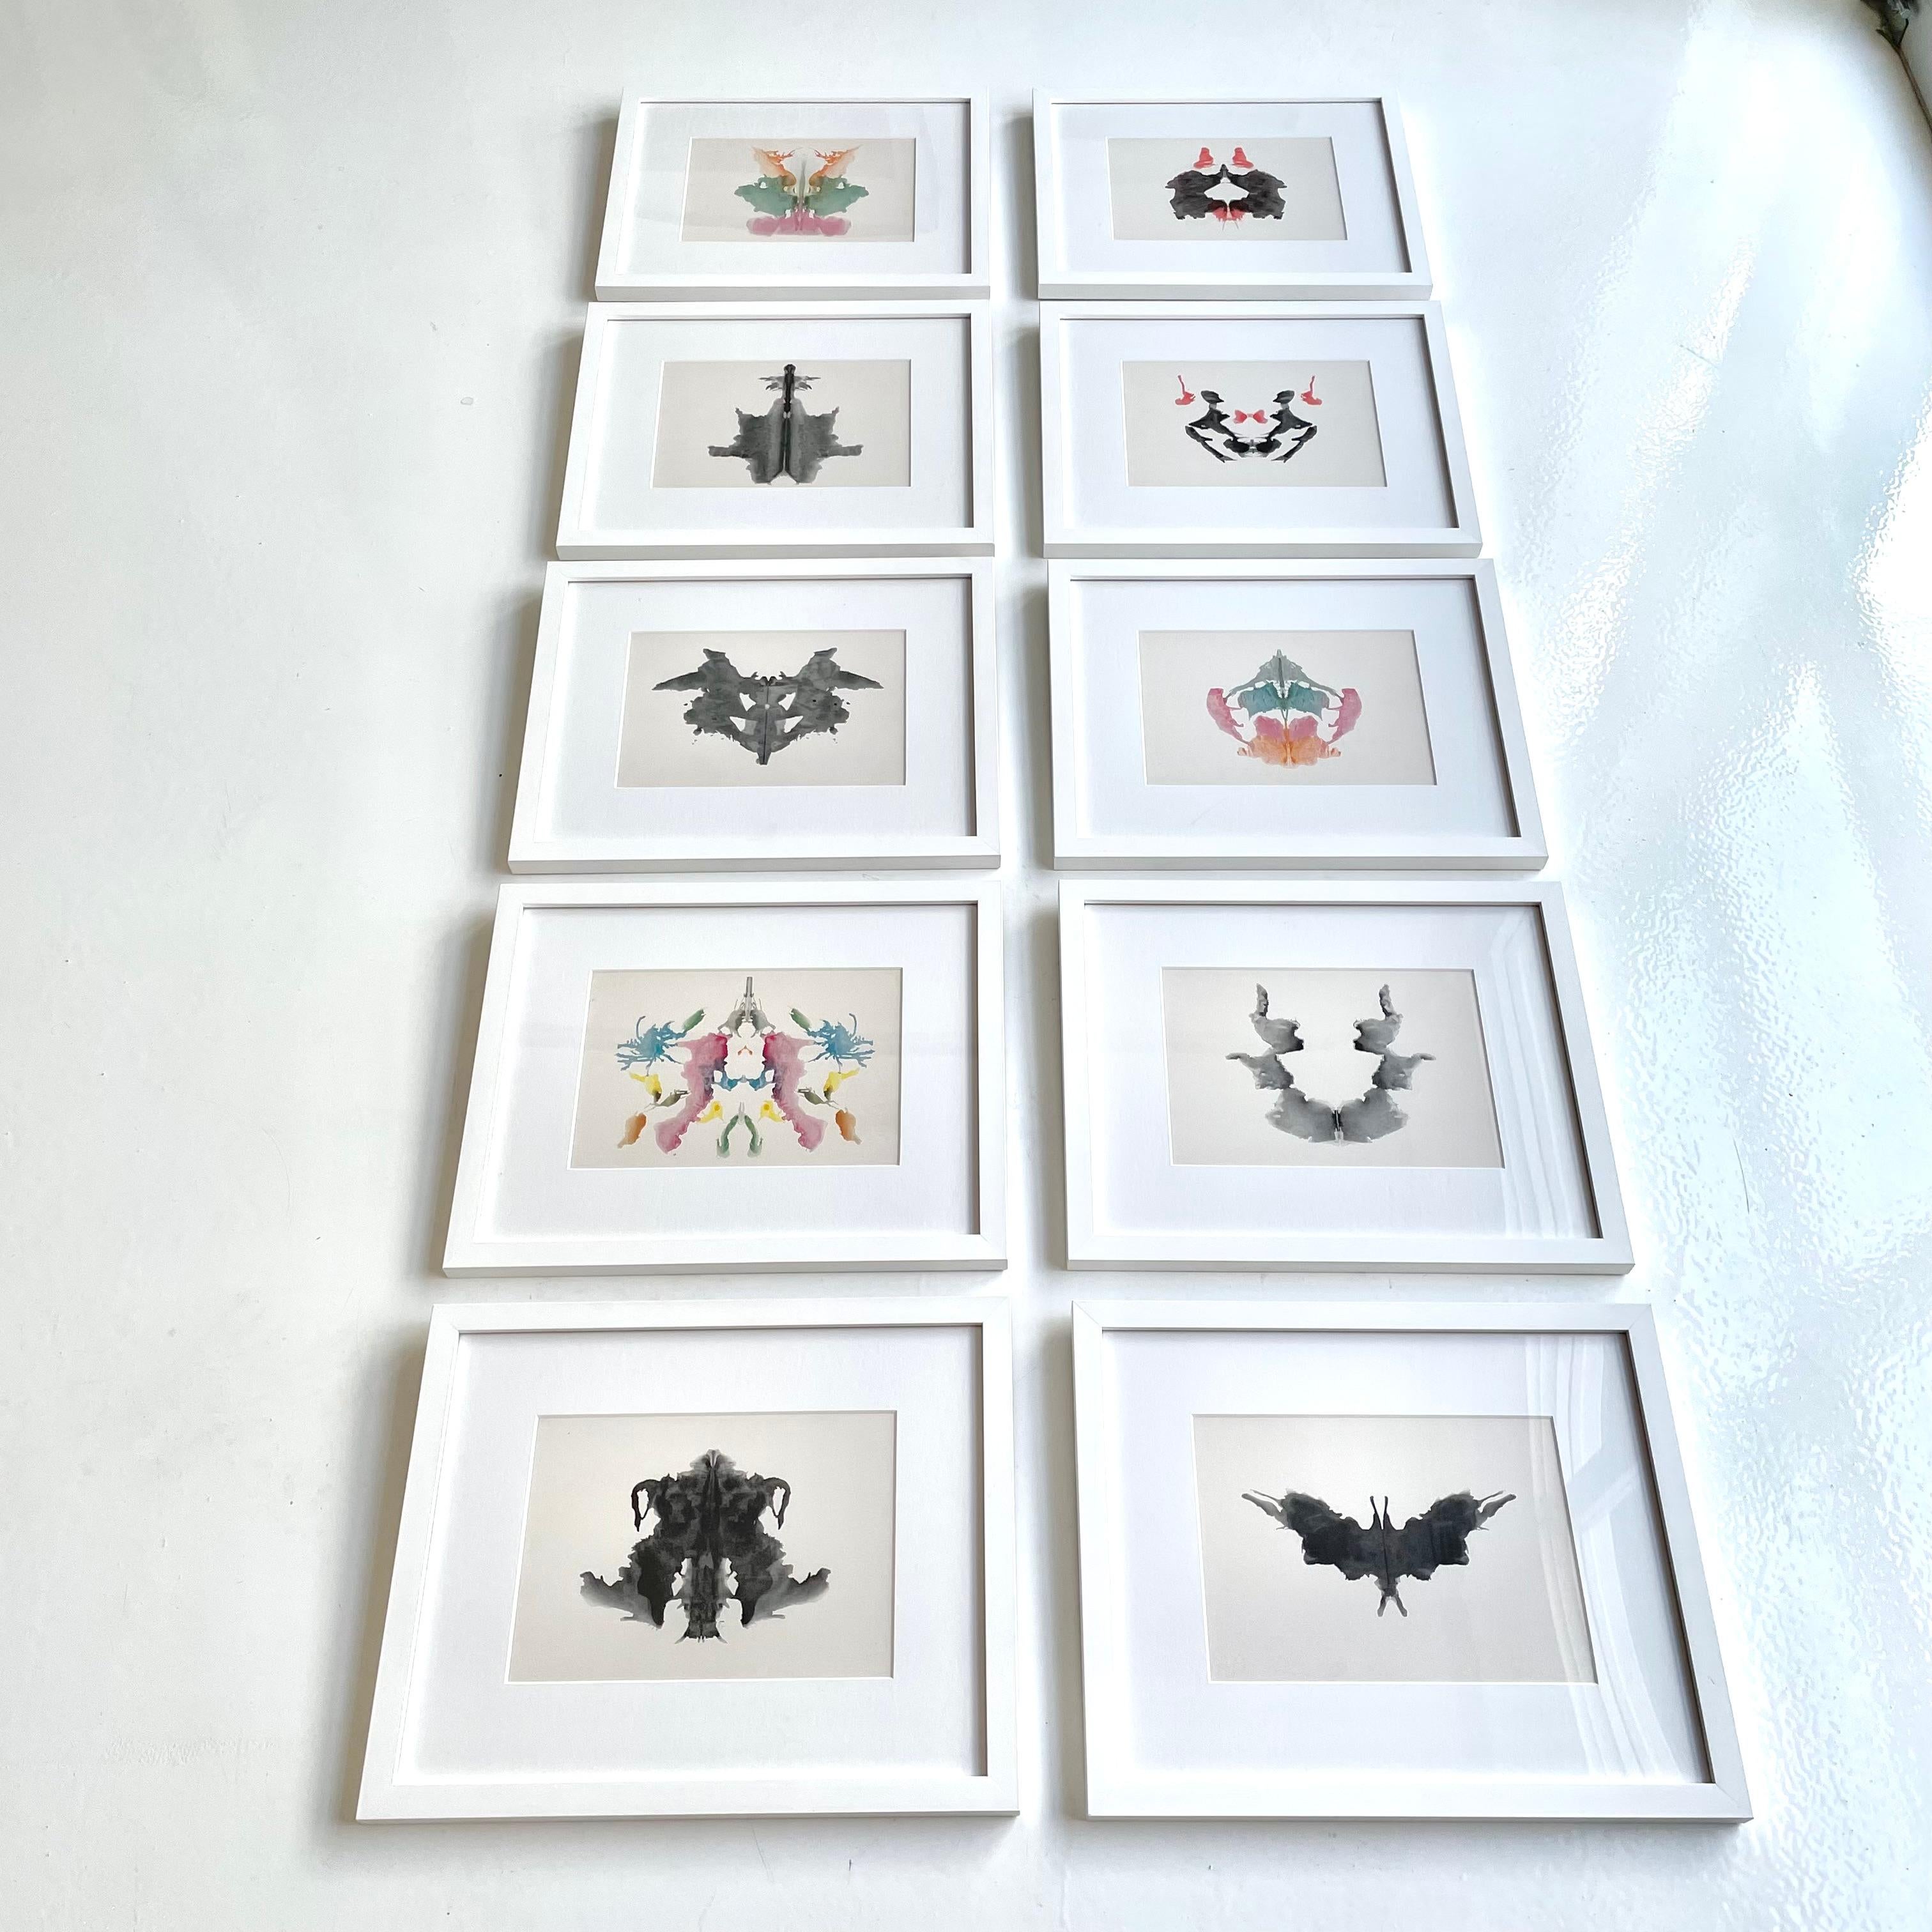 Unique set of Hermann Rorschach inkblots from 1921. This is a complete, first edition set. Complete set includes 10 inkblot cardboard plates on a tea stained matting with new white frame. Original case also included. Each inkblot is labeled 1921.